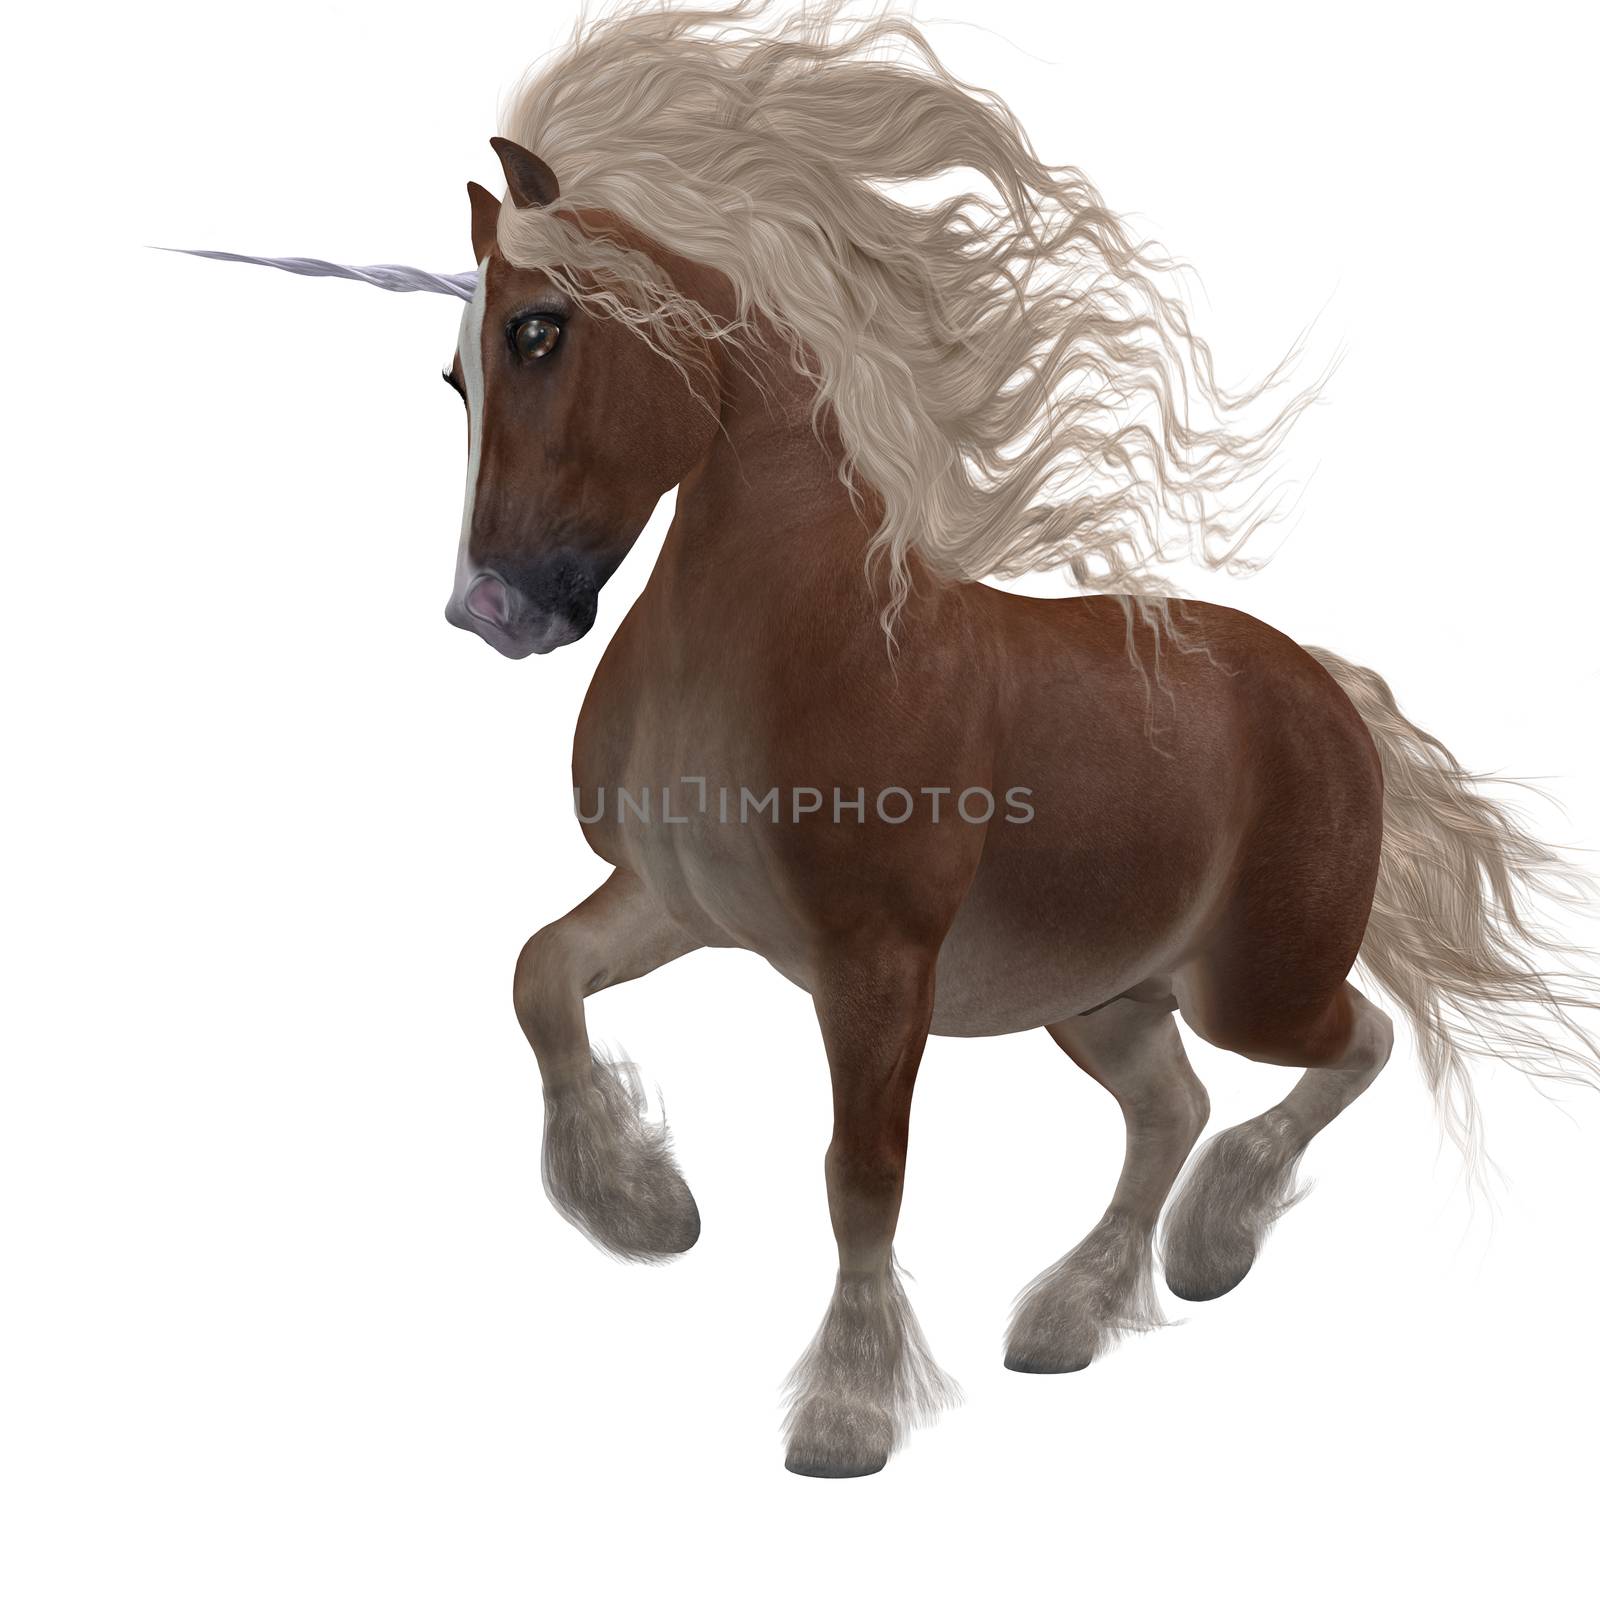 A fantasy animal that is a cross of the Shetland pony and the Unicorn of folklore and legend.